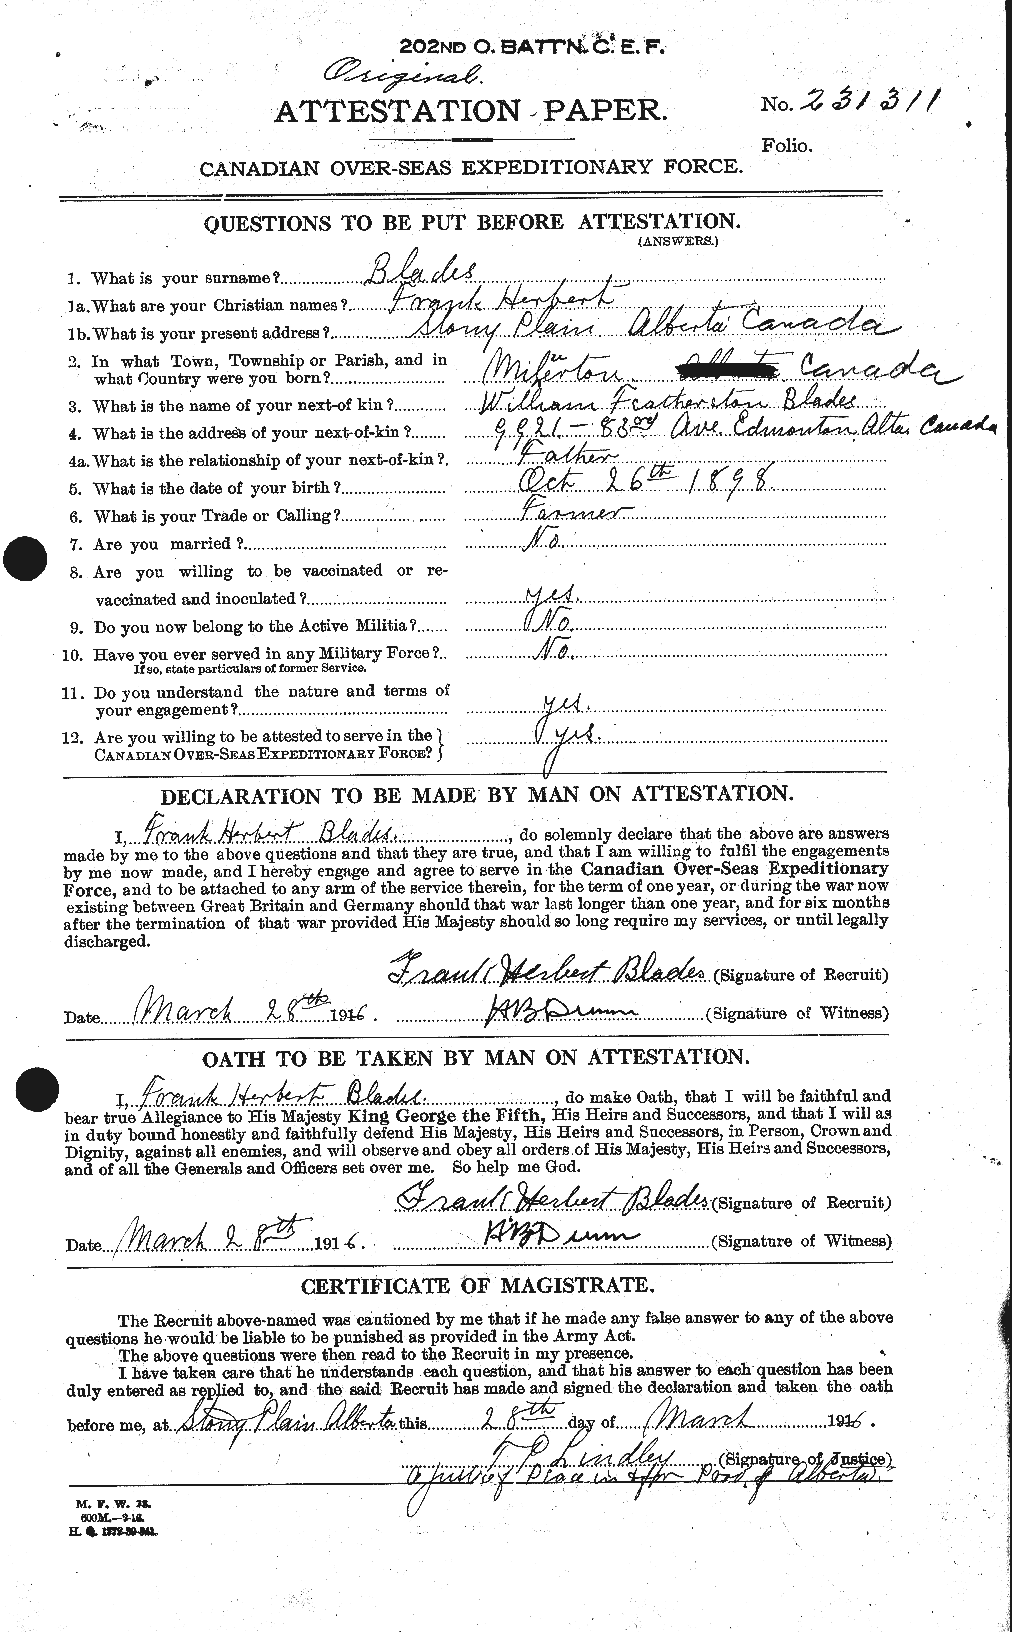 Personnel Records of the First World War - CEF 245927a